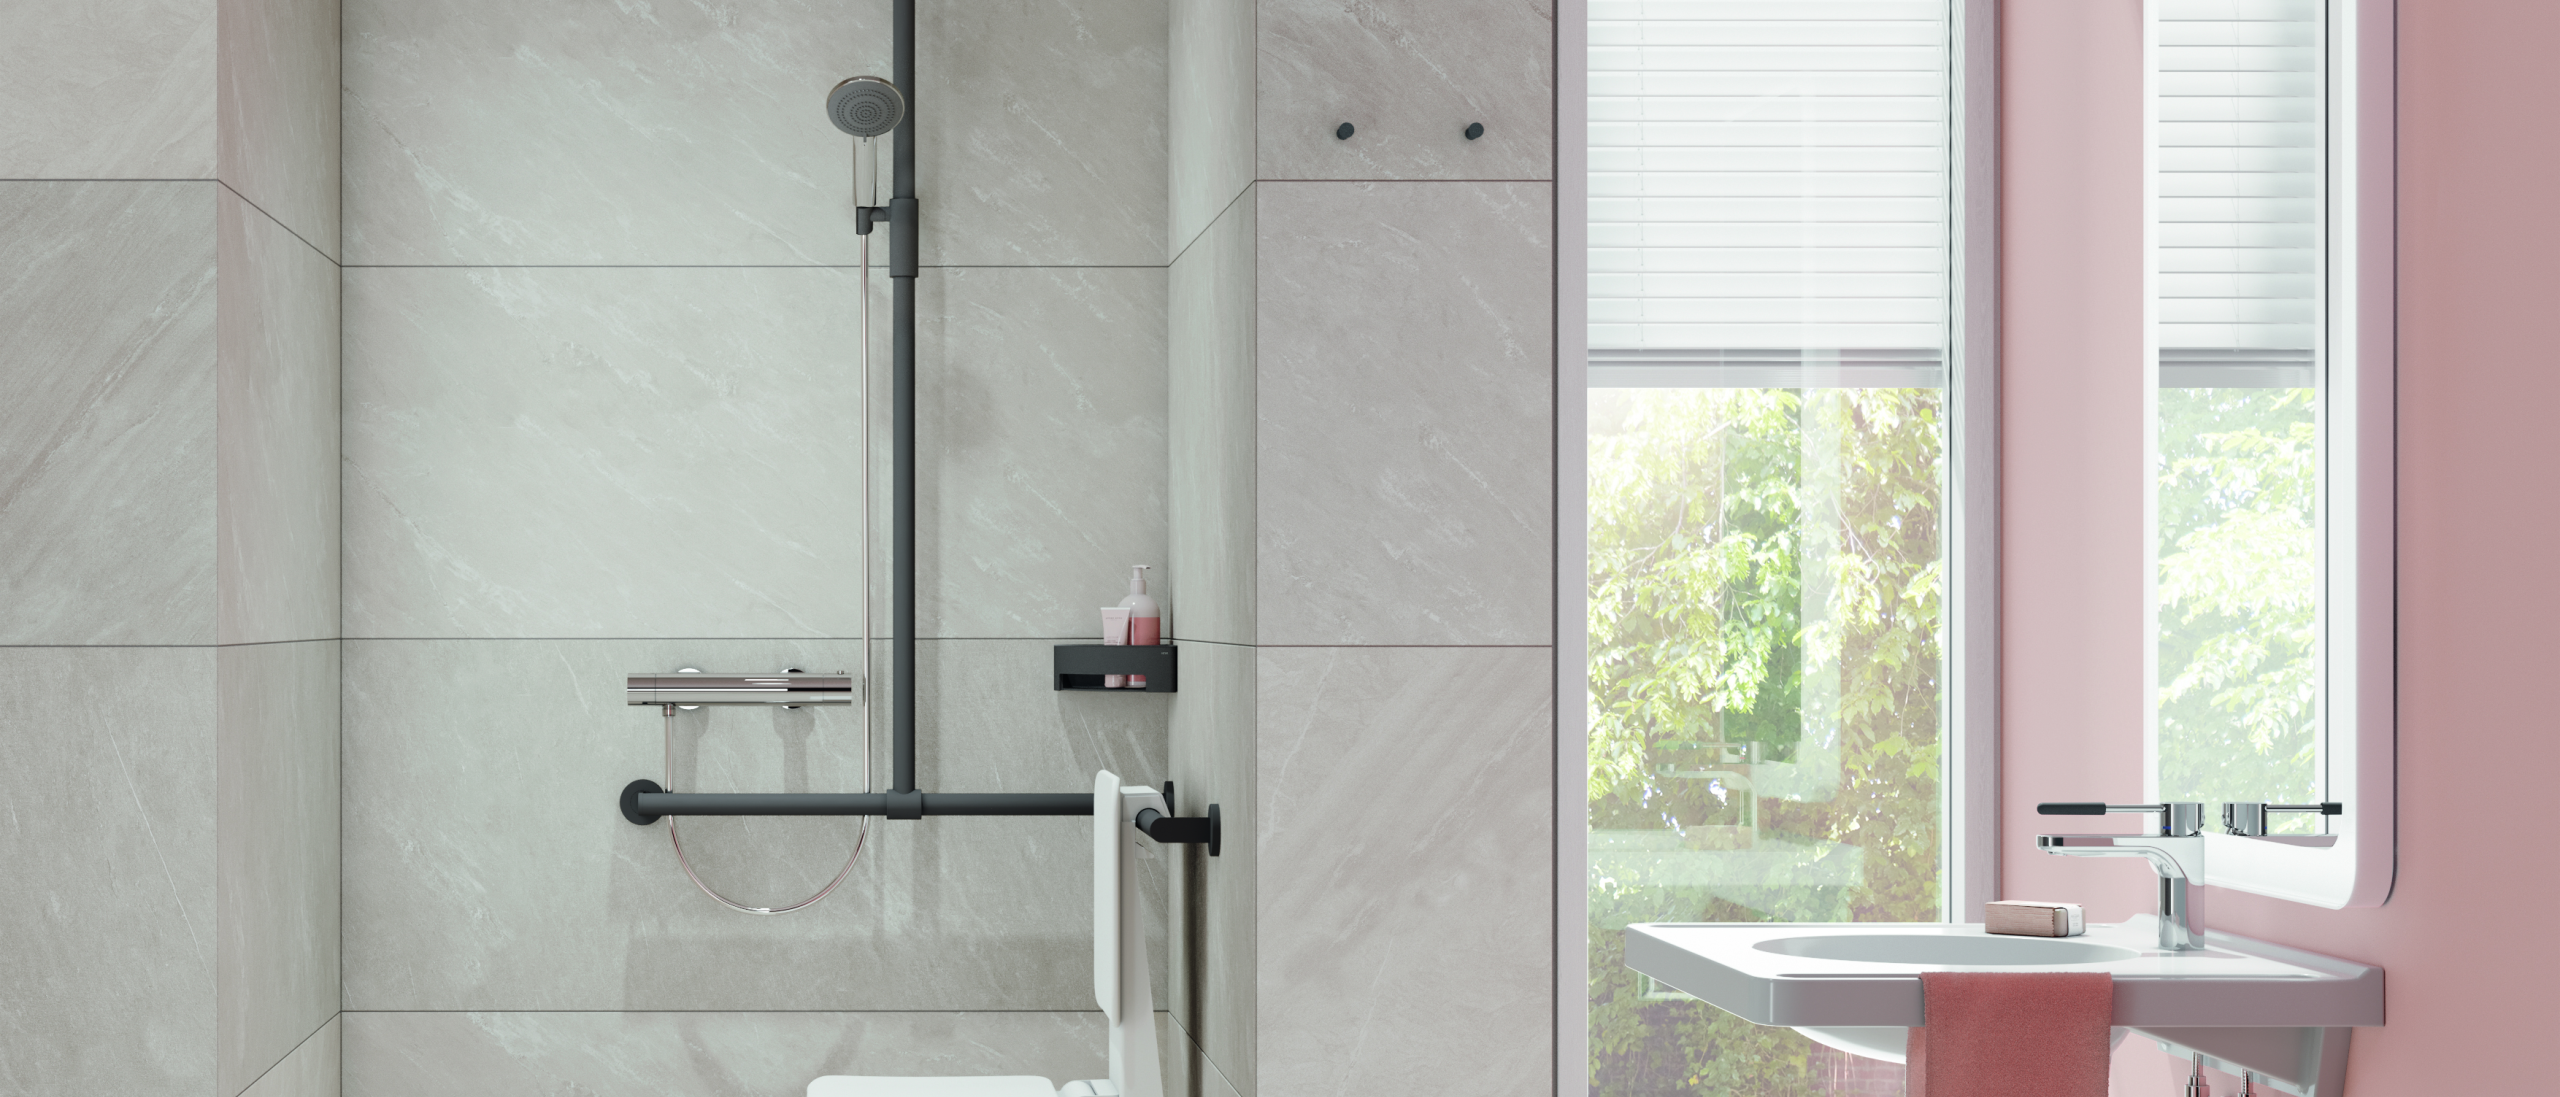 Shower area equipped with an infinitely adjustable magnetic shower holder